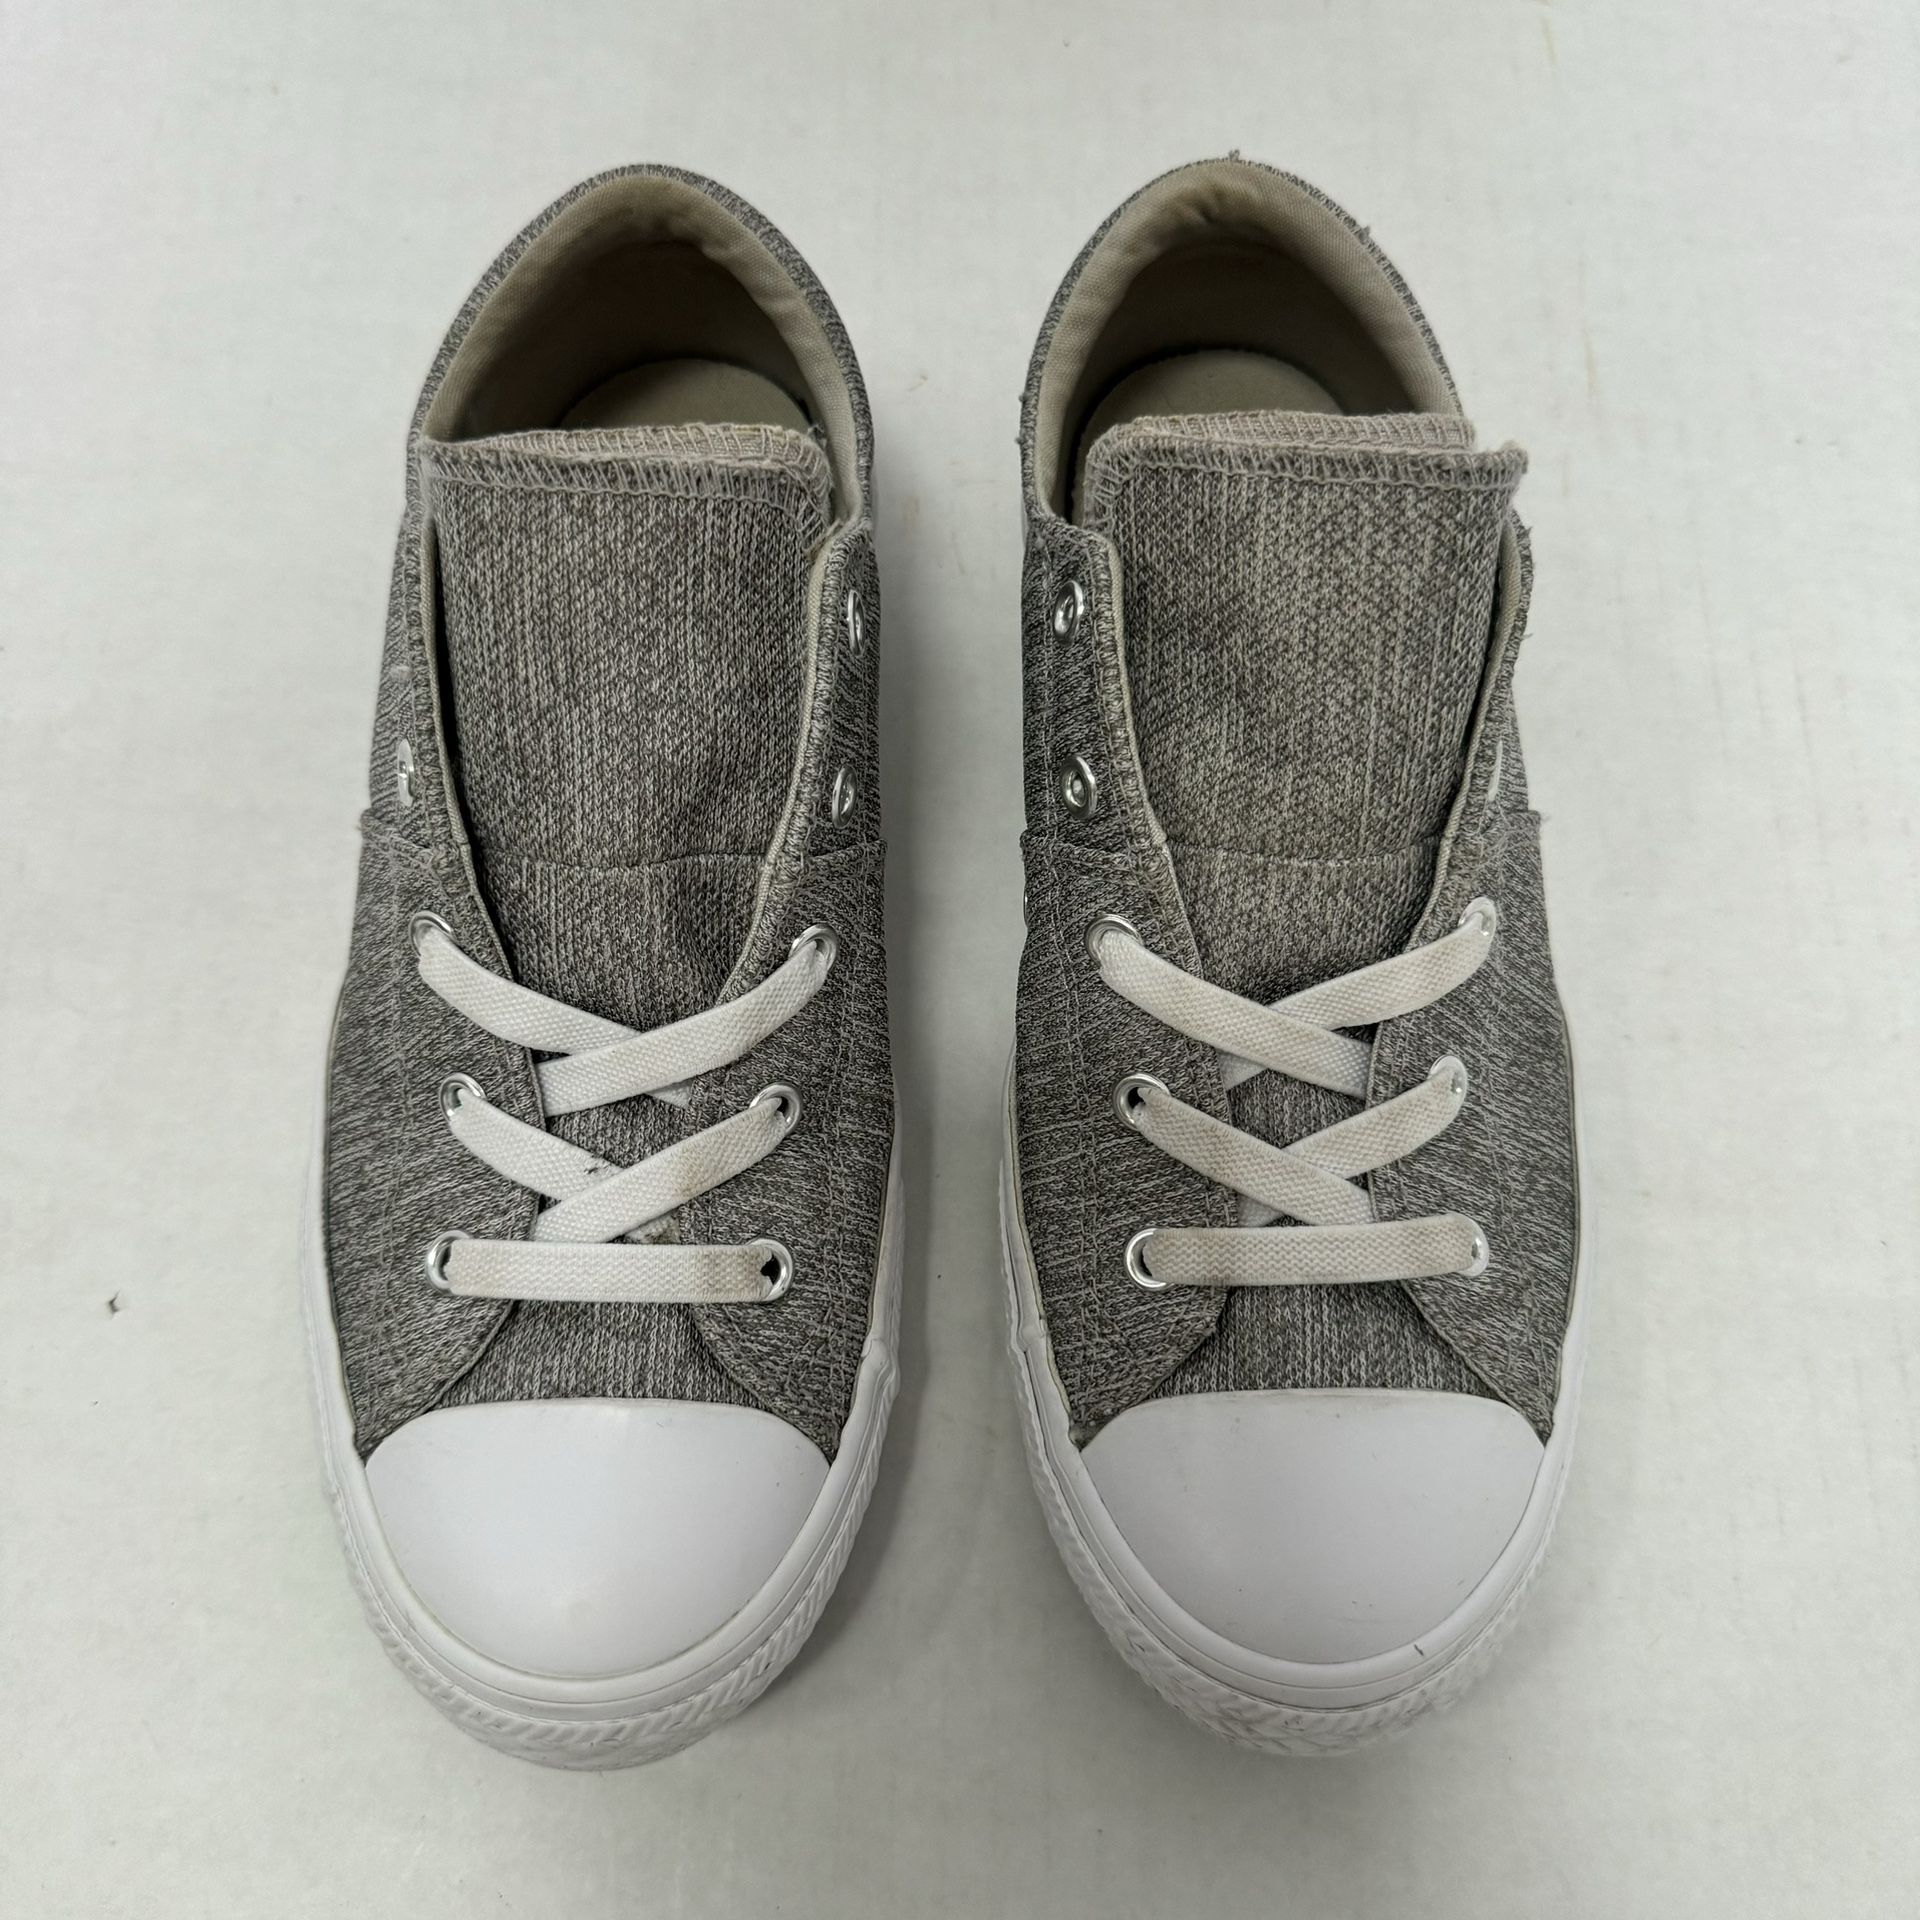  Women Converse All Star Shoes Size 4